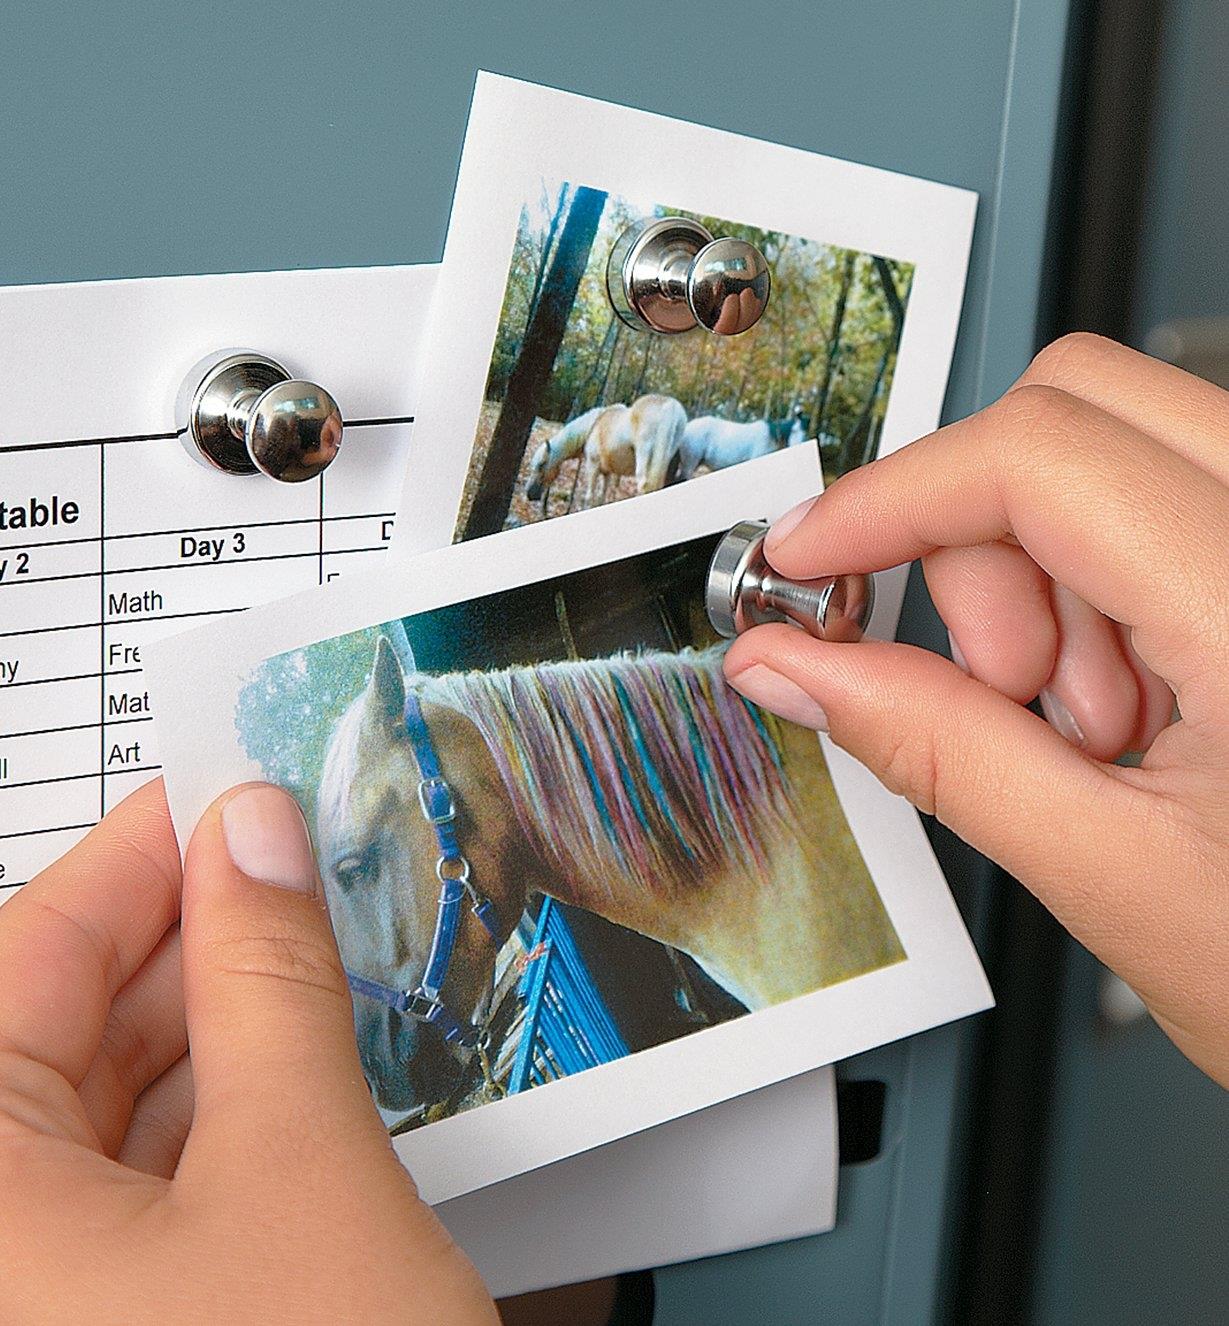 Three fridge magnets on a locker door, holding up photos and a timetable